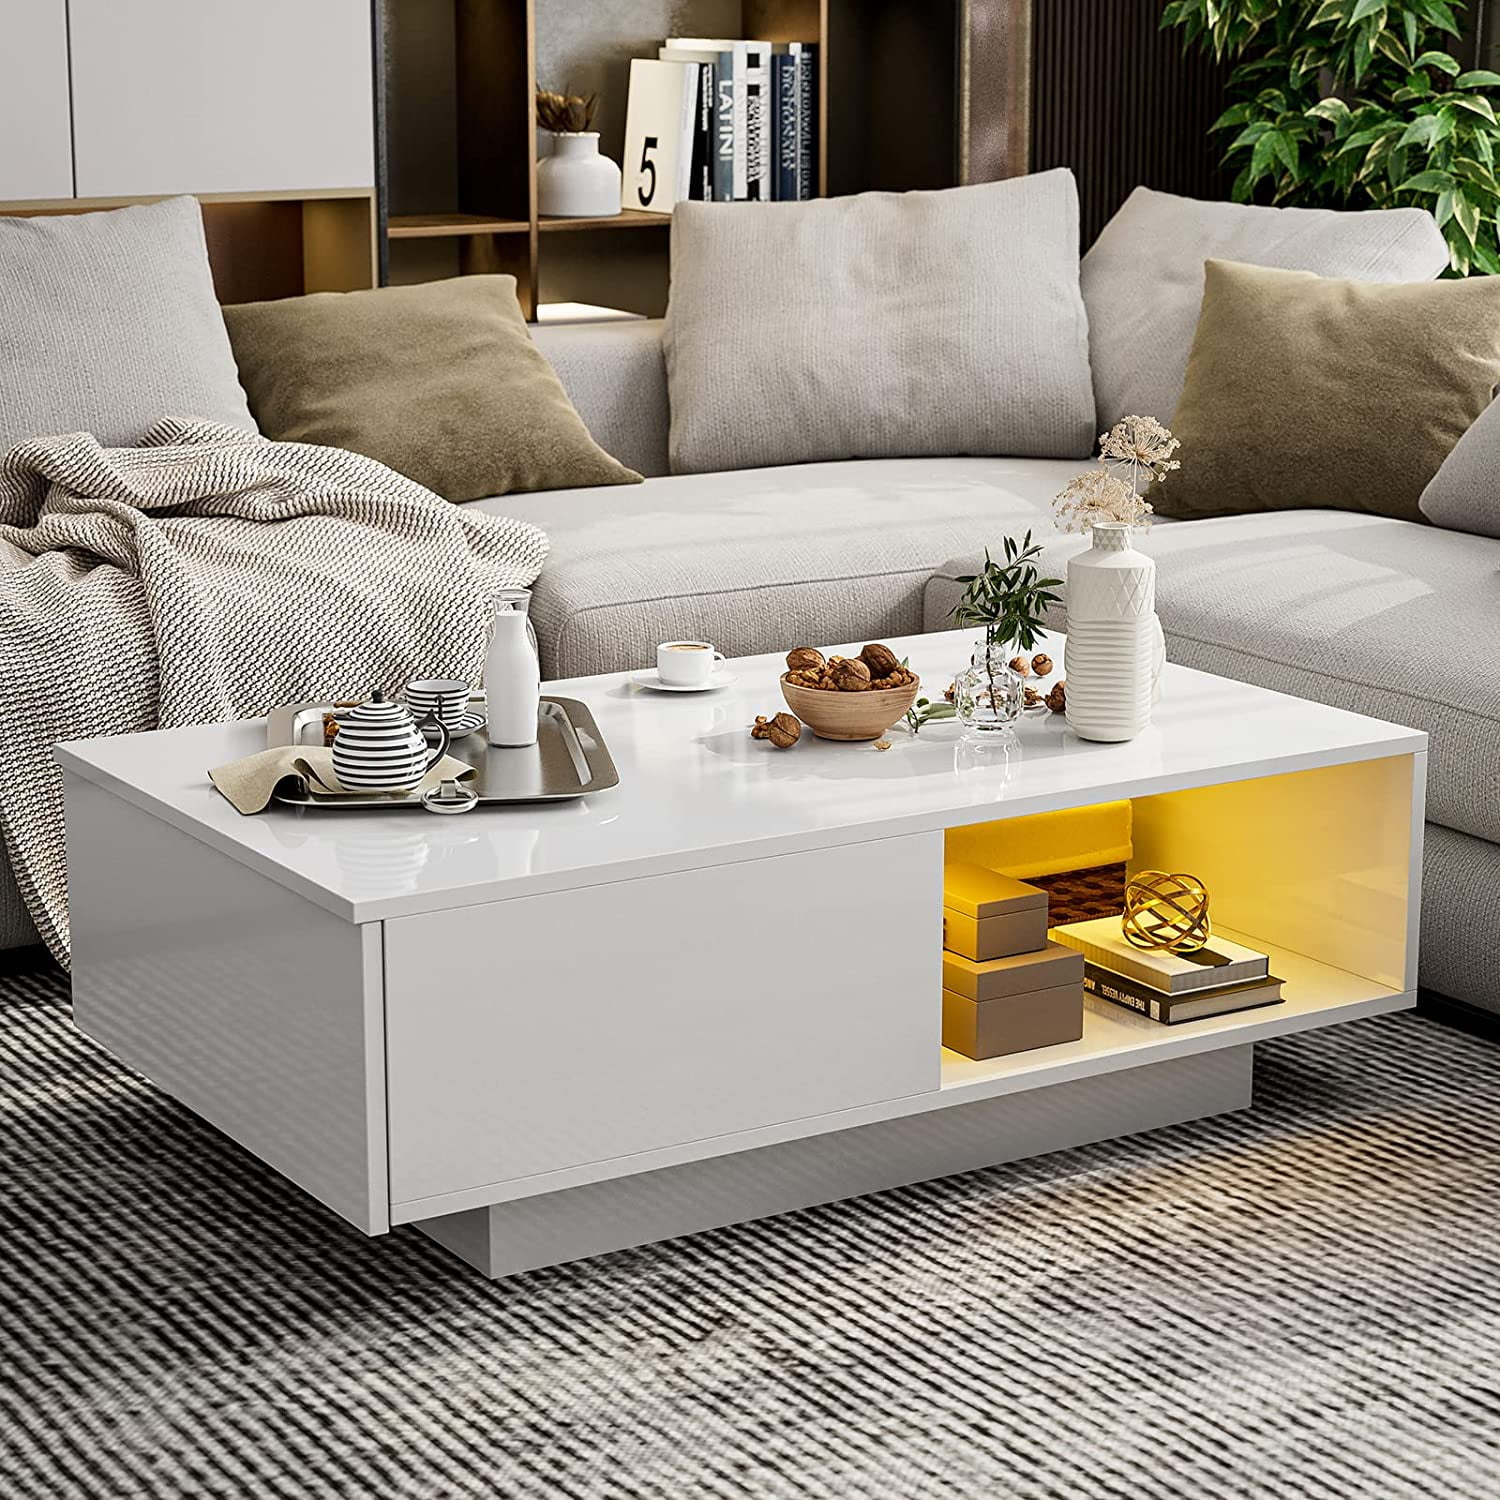 IKIFLY Modern High Gloss Coffee Table with 16 Colors LED Light, LED ...